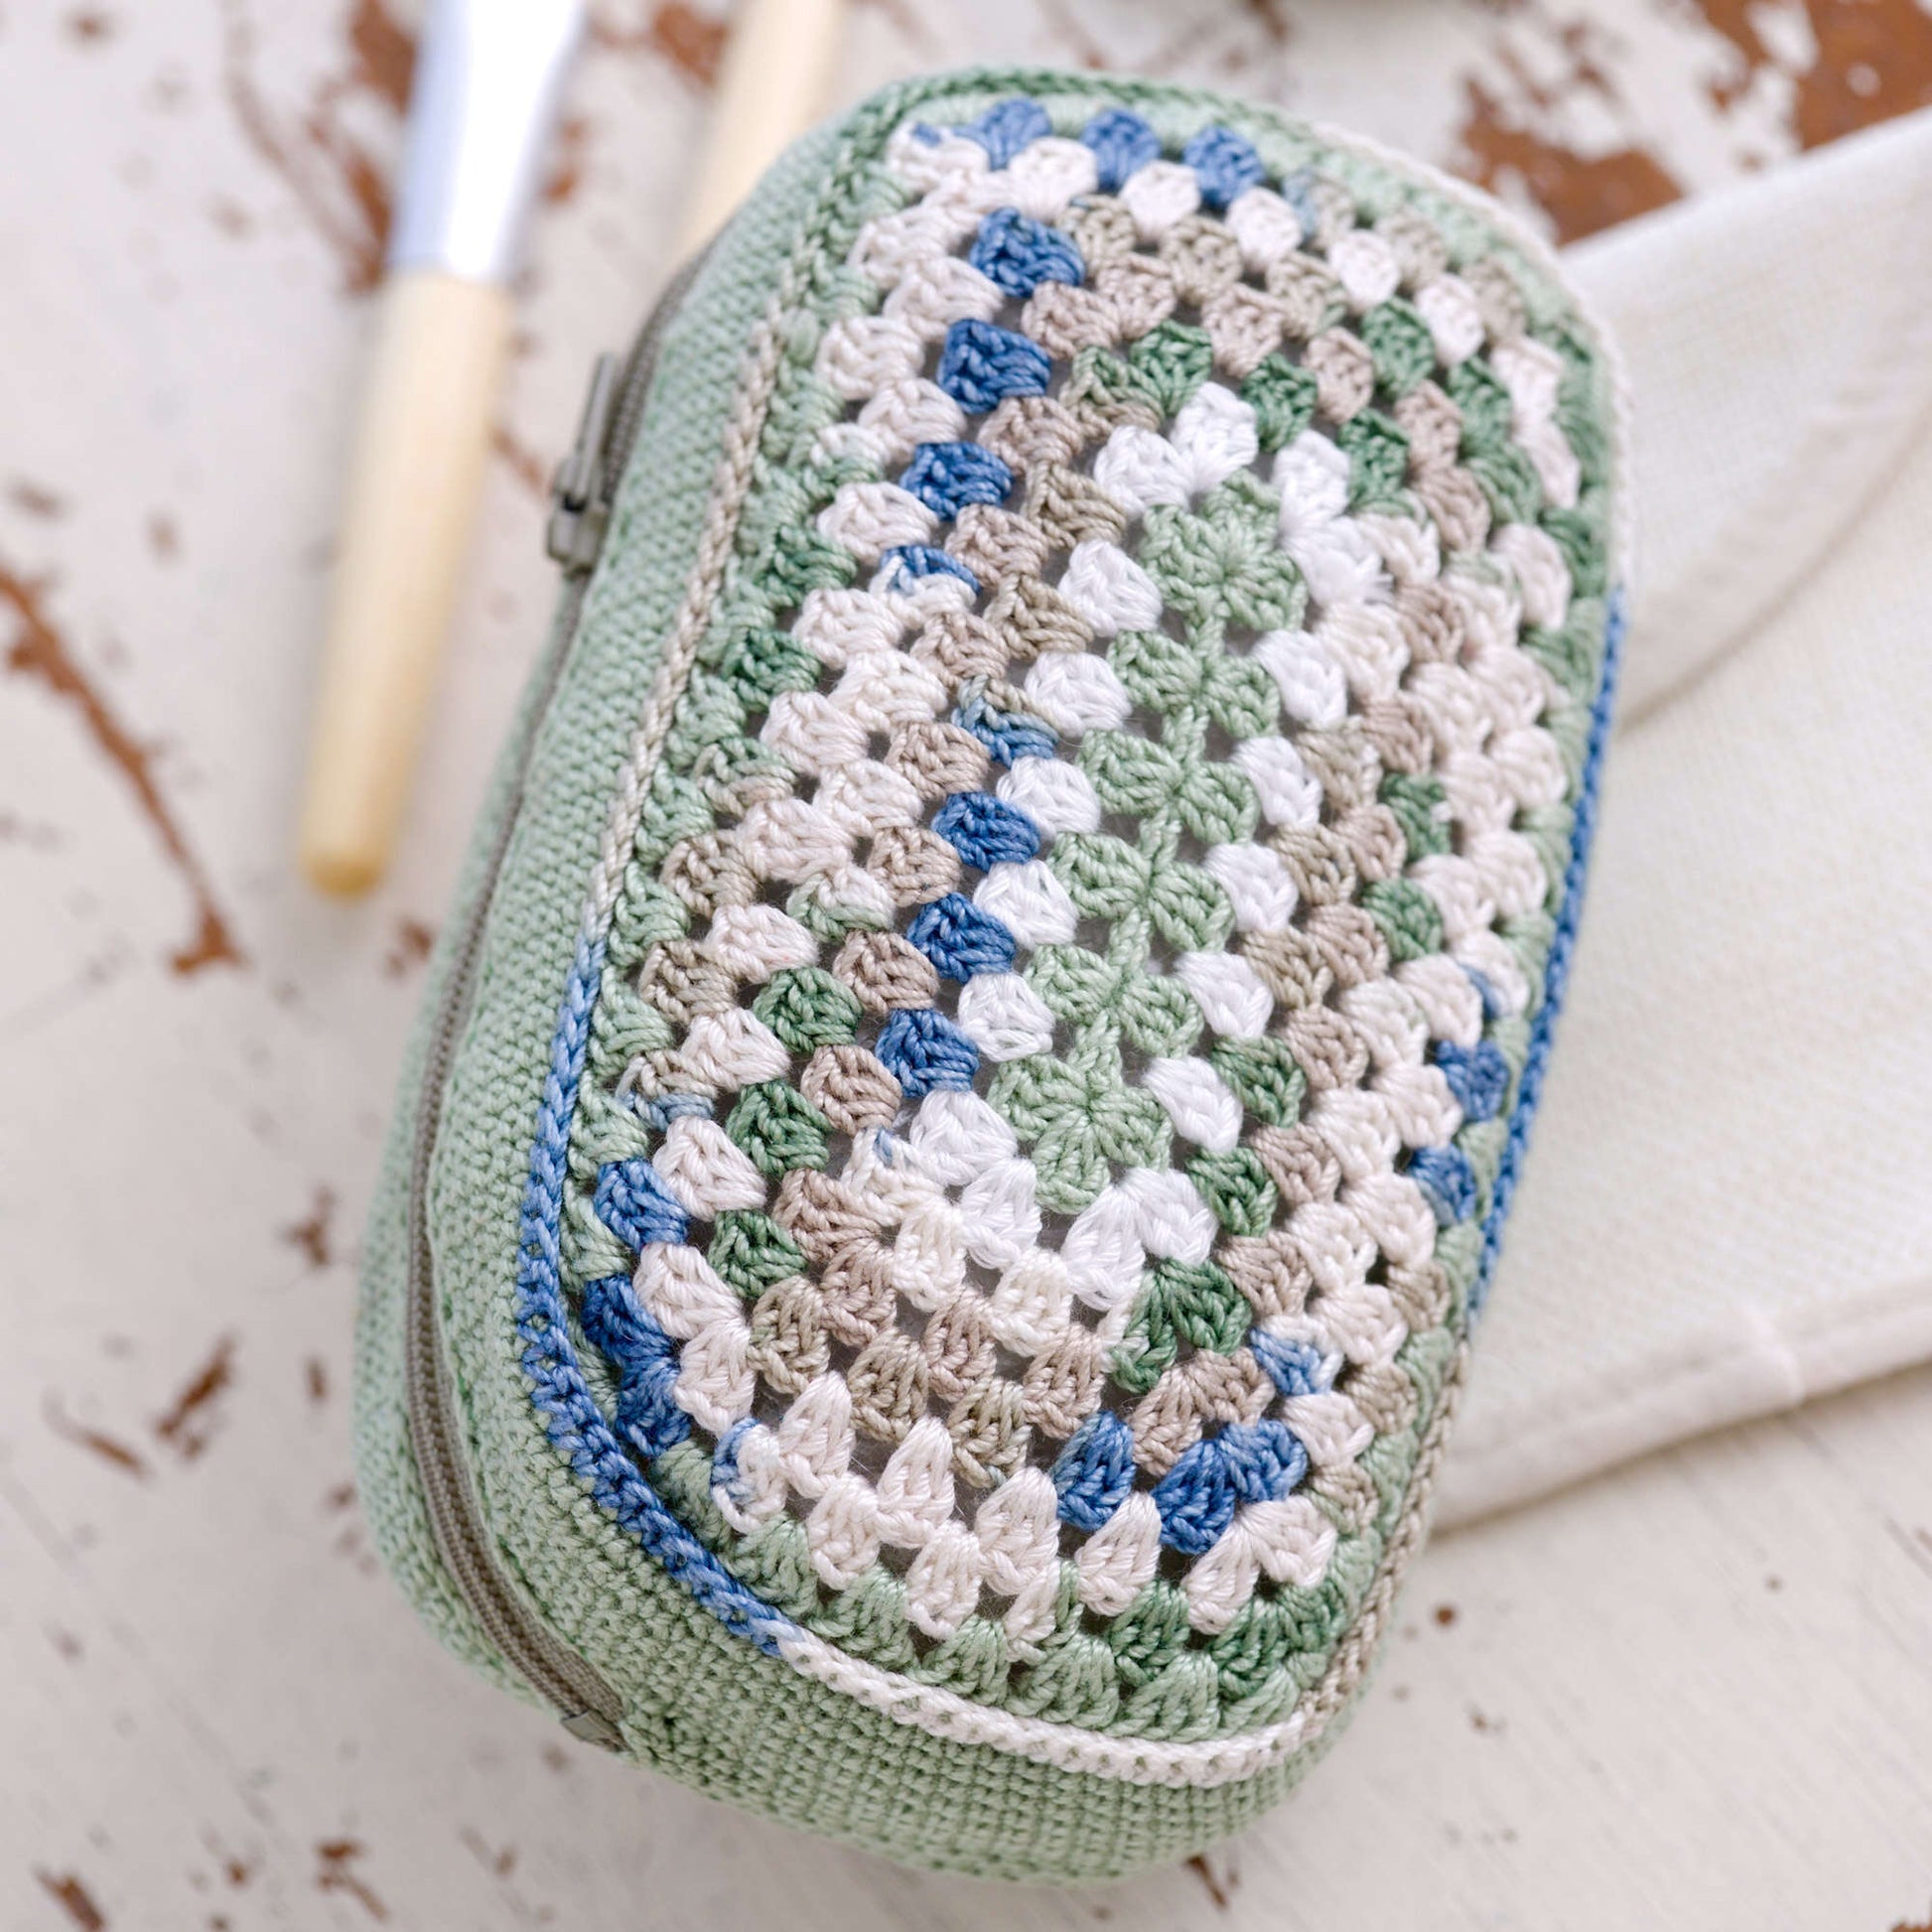 Aunt Lydia's Make Up Bag Crochet Accessory made in Aunt Lydia's Classic Crochet Thread yarn